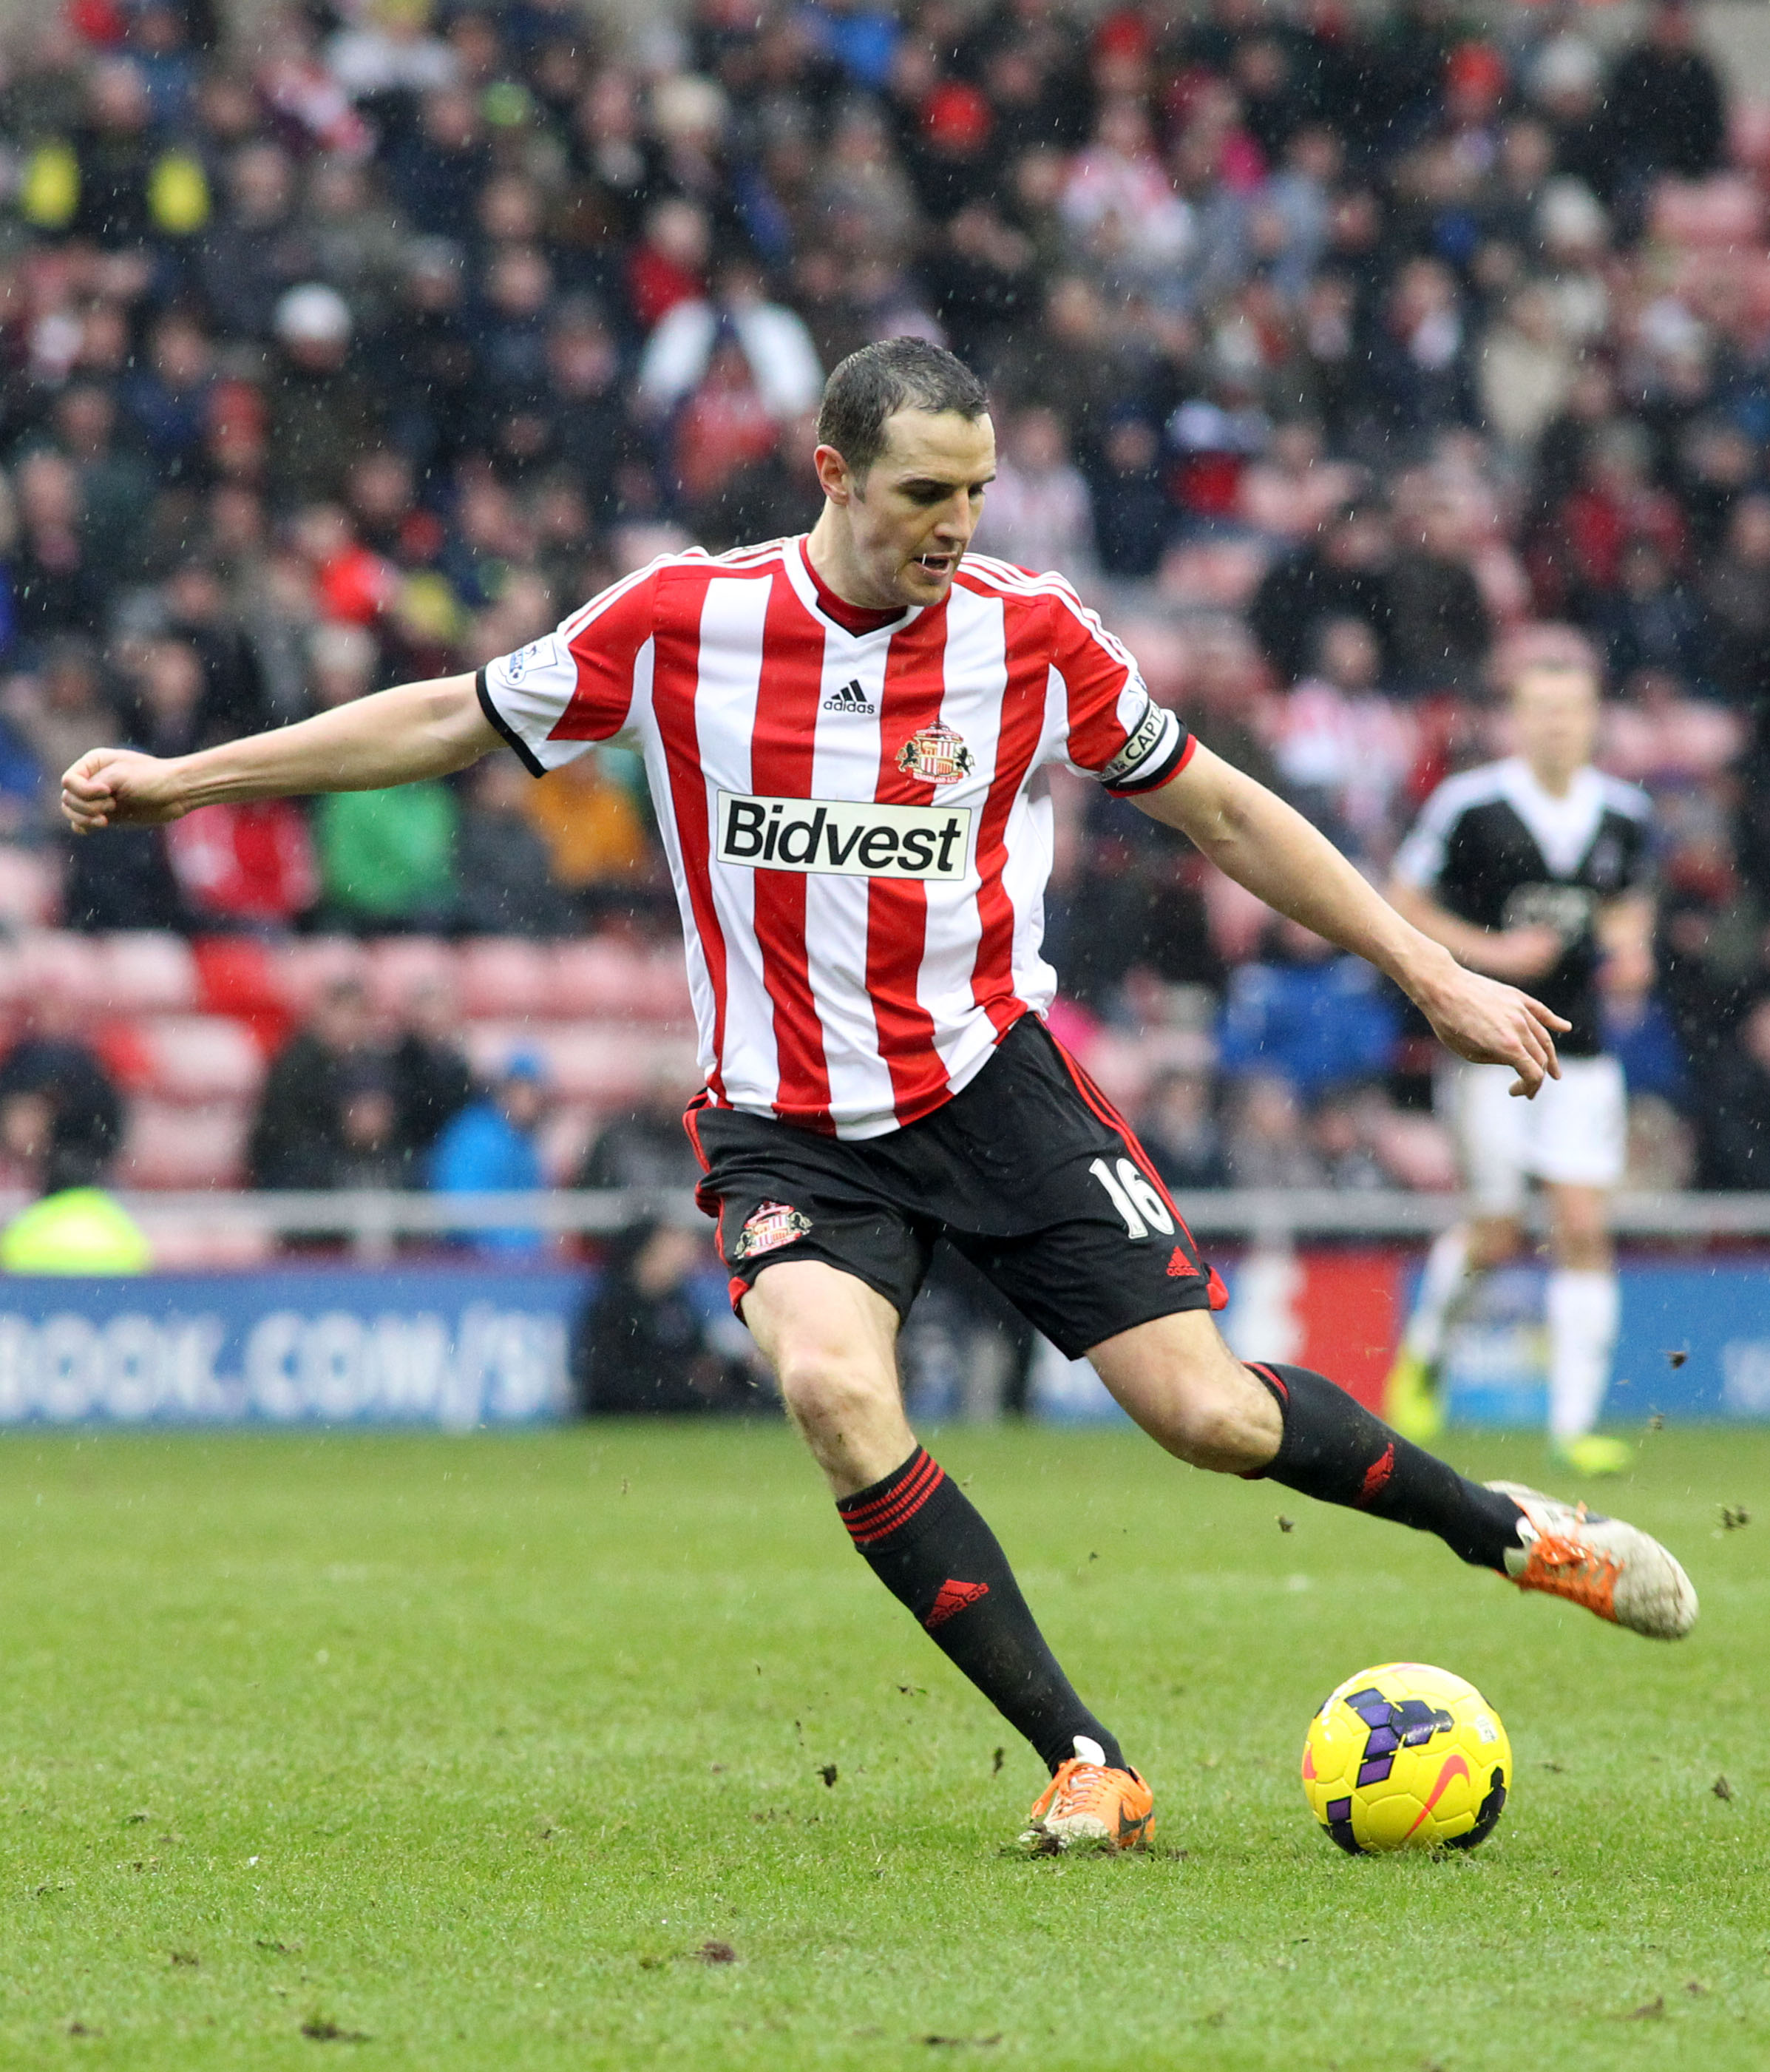 Sunderland captain John O'Shea in action during the Barclays Premier League match between Sunderland and Southampton at the Stadium of Light on January 18, 2014. (Ian Horrocks—Getty Images)